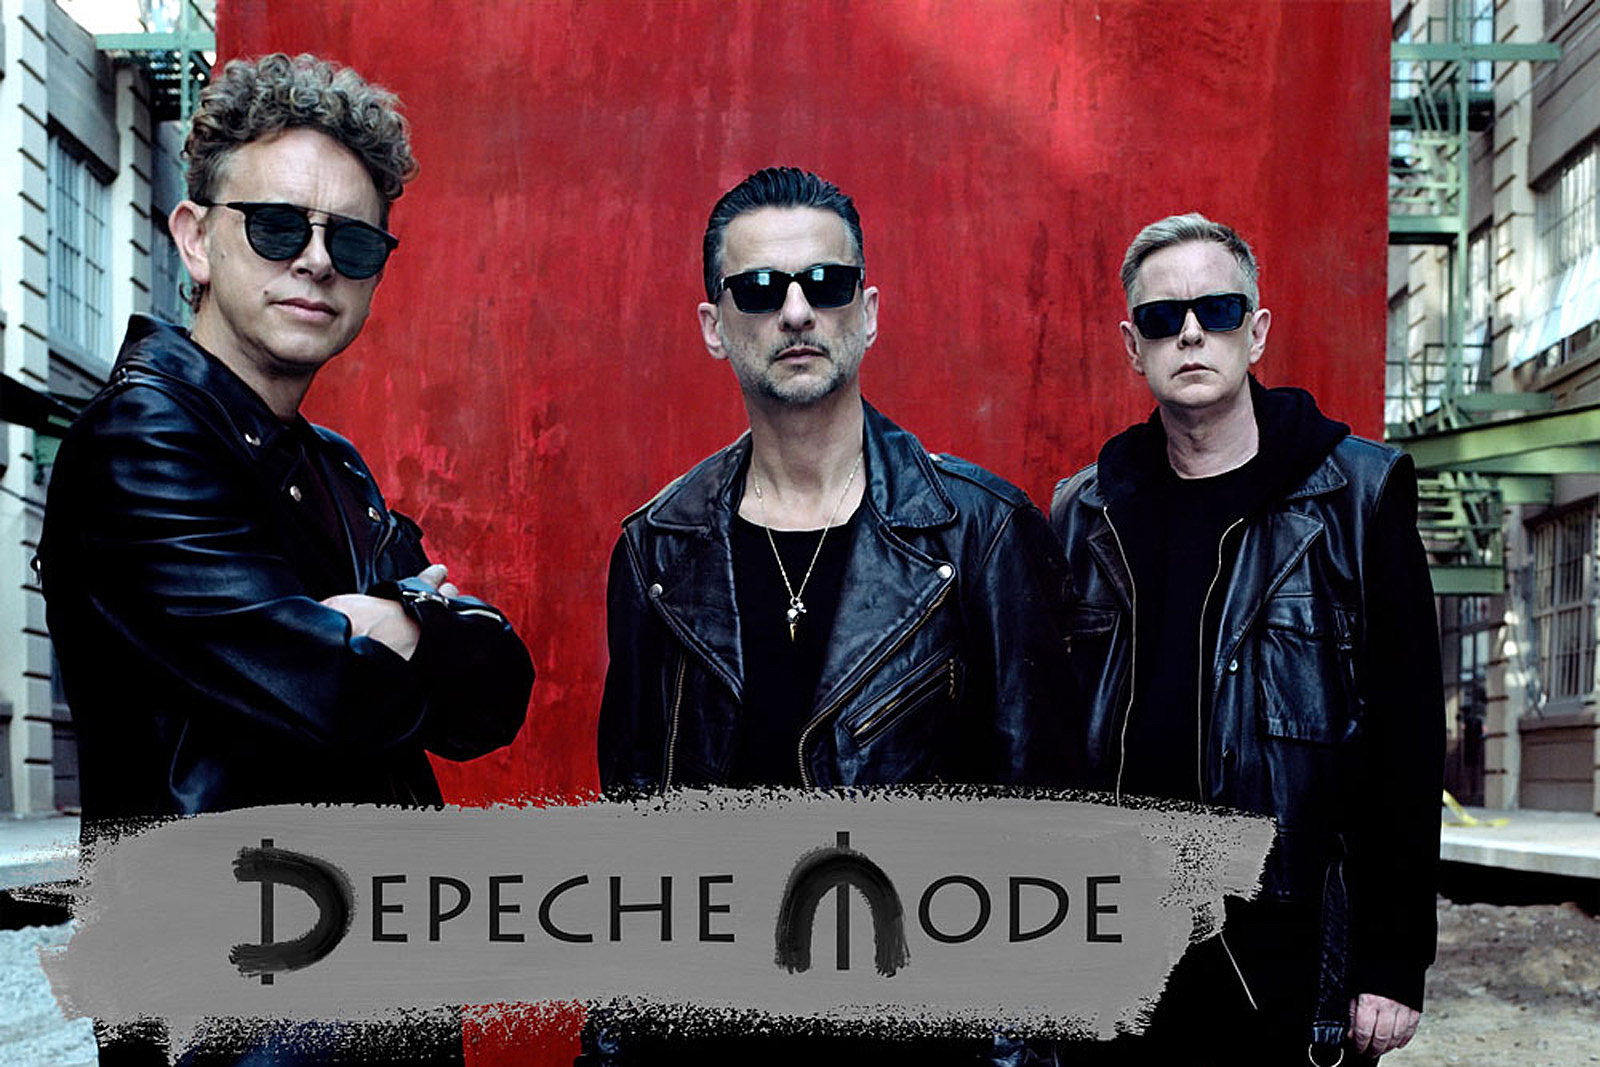 NBHAP ranked all Depeche Mode Albums from Worst to Best